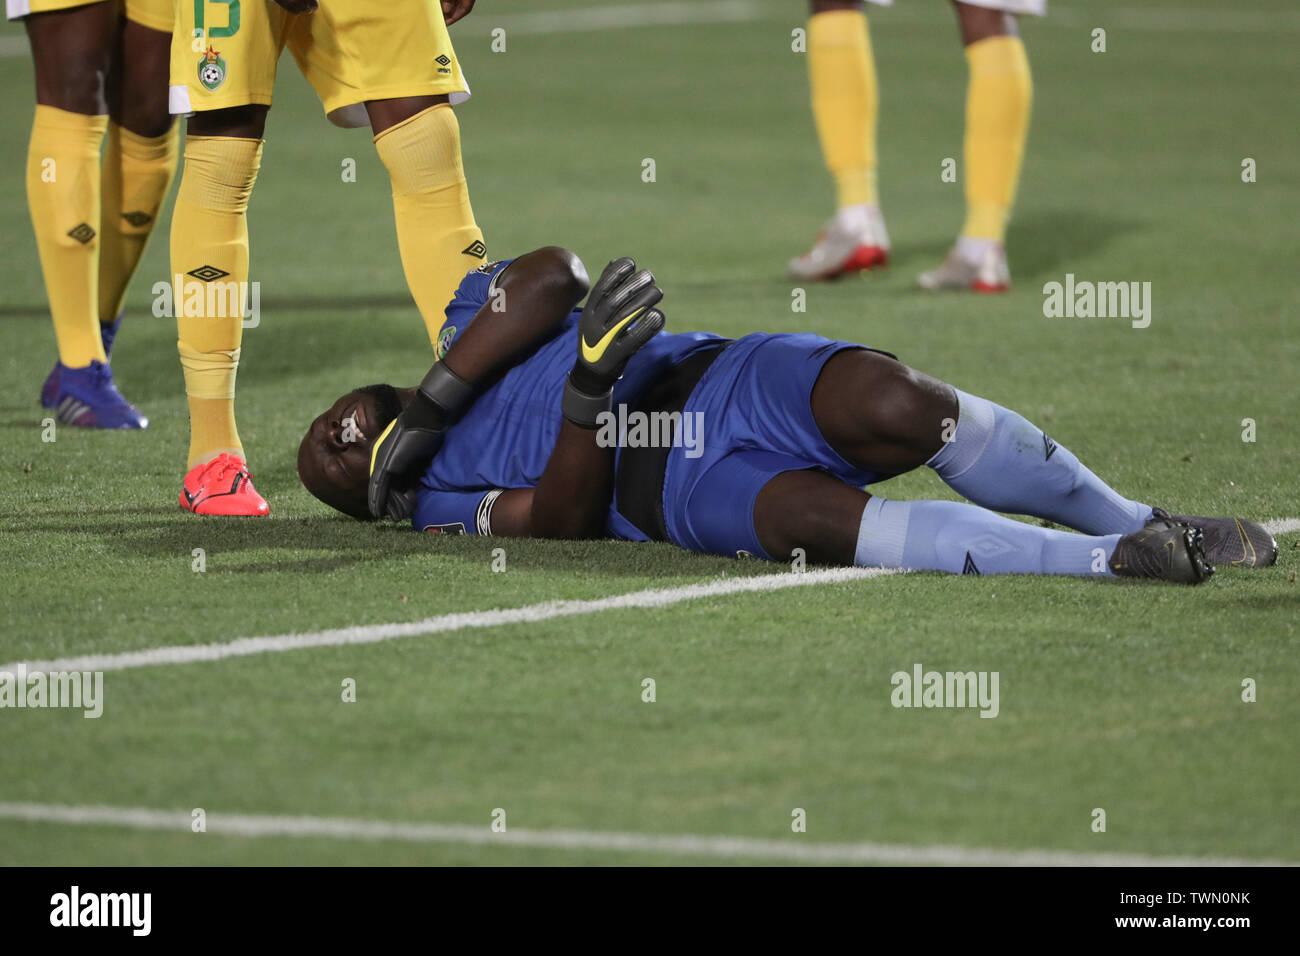 Cairo, Egypt. 21st June, 2019. Zimbabwe goalkeeper Edmore Sibanda lies injured on the ground during the 2019 Africa Cup of Nations Group A soccer match between Egypt and Zimbabwe at the Cairo International Stadium. Credit: Oliver Weiken/dpa/Alamy Live News Stock Photo